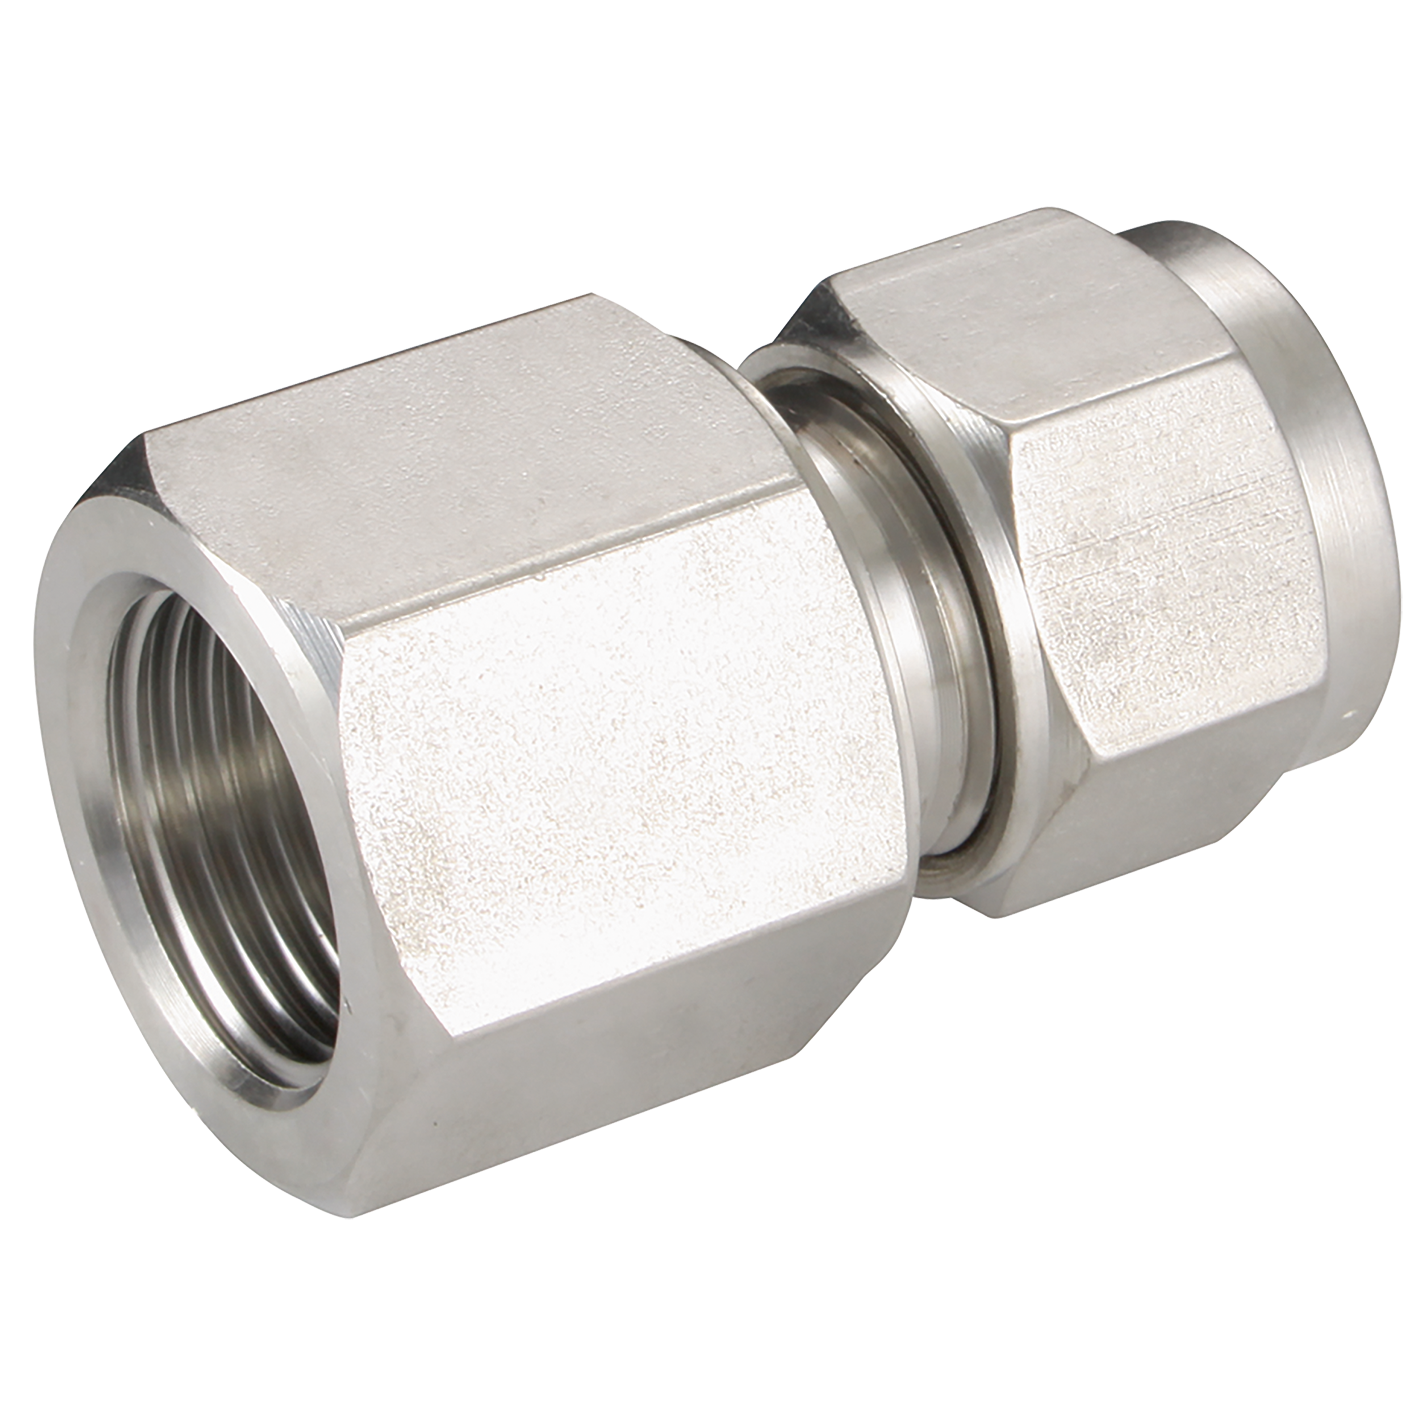 FEMALE ISO CONNECTOR 1/2 OD 1/2 BSPT